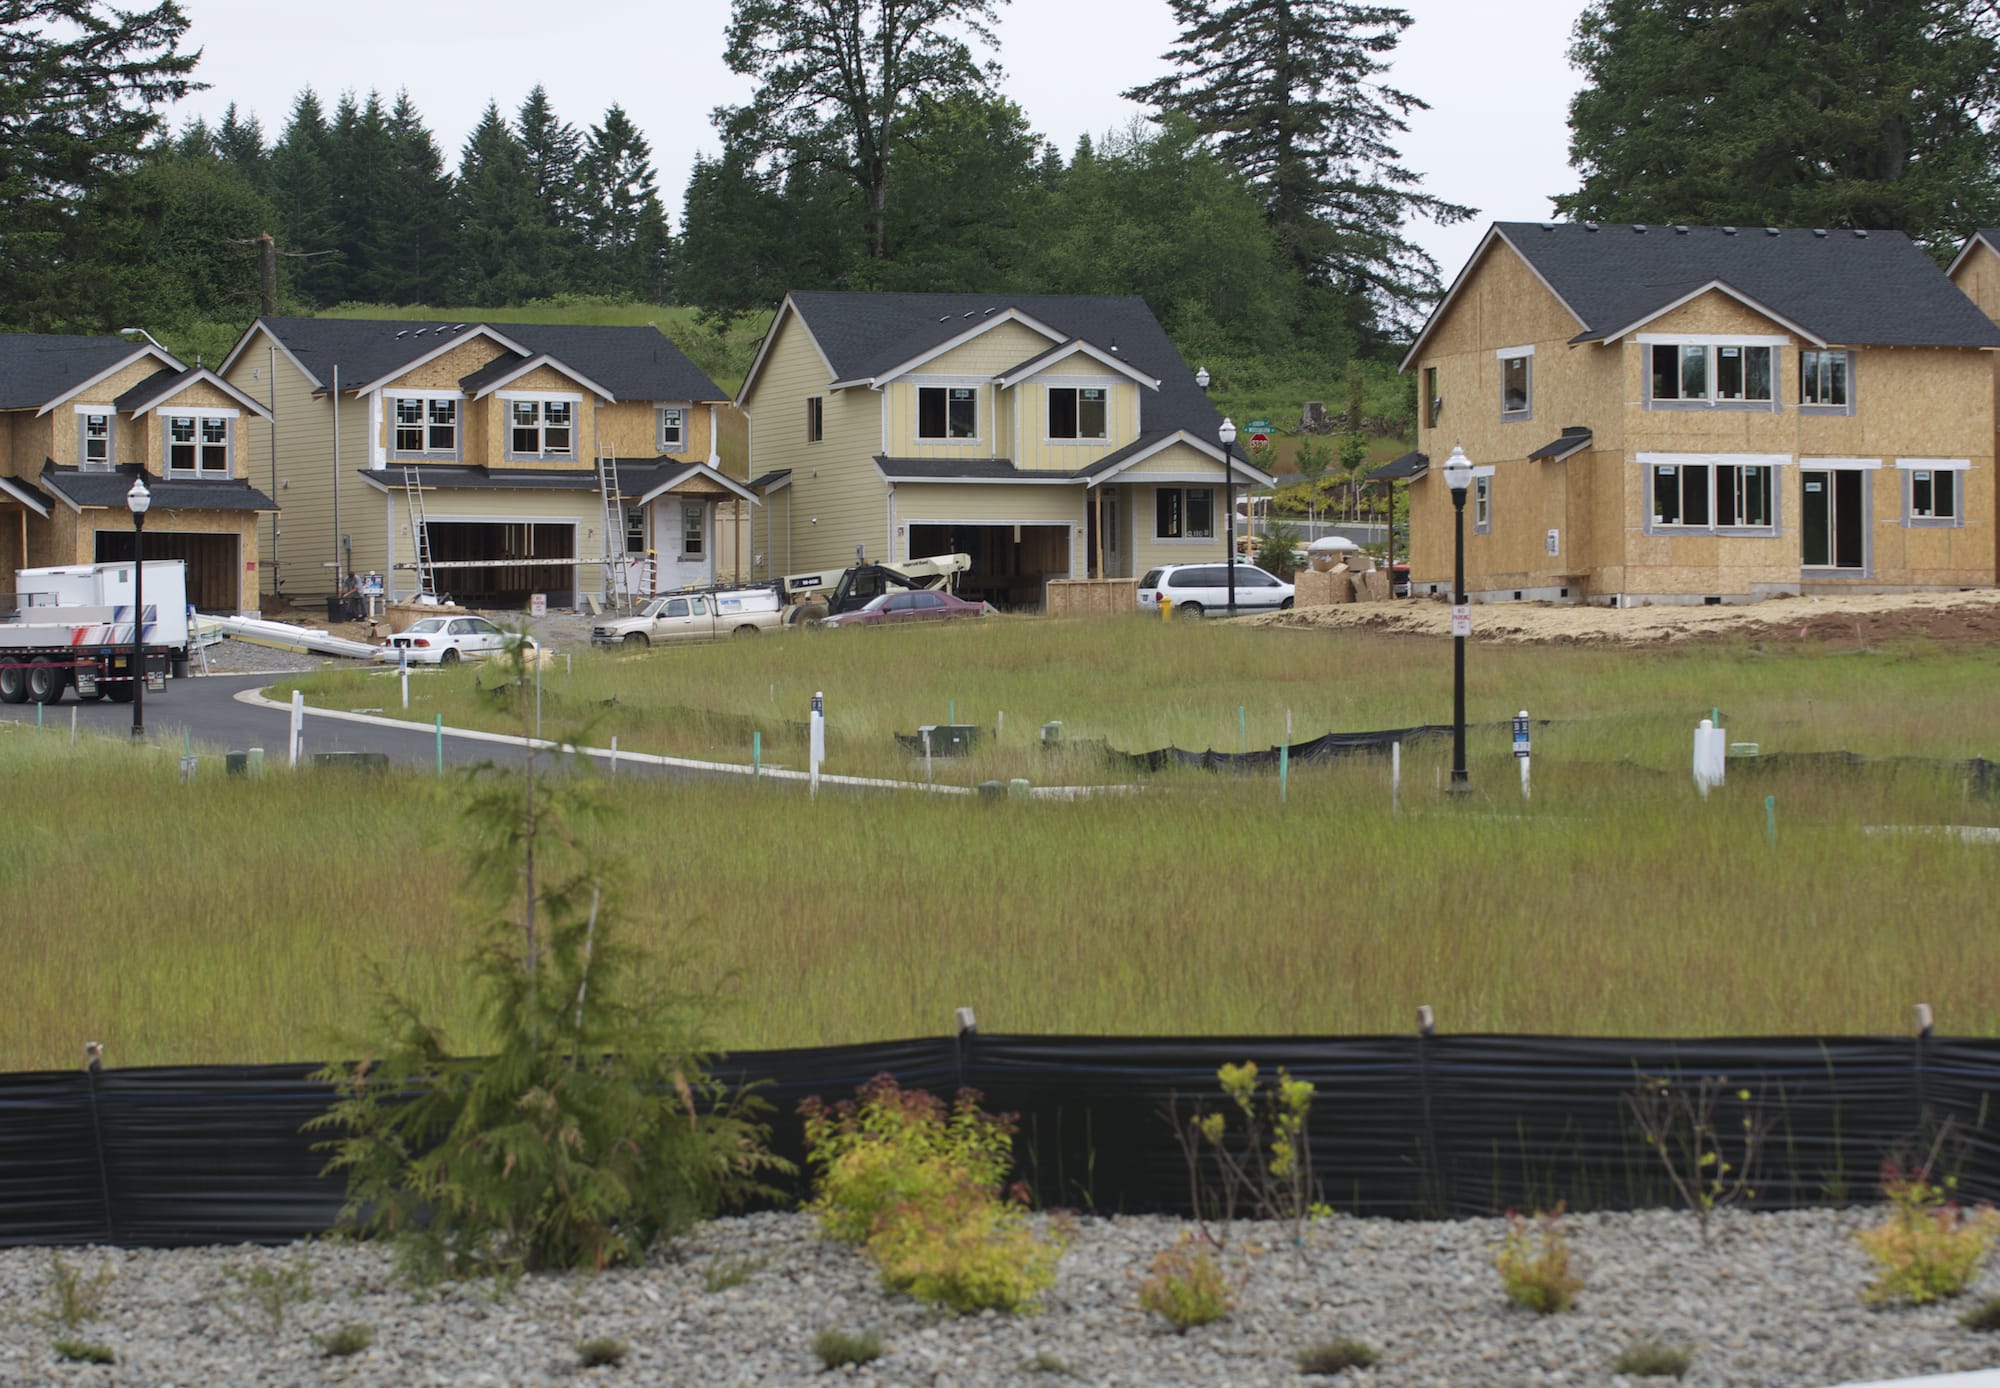 Crews work at the Hills at Round Lake, a new 333-lot housing development in Camas.